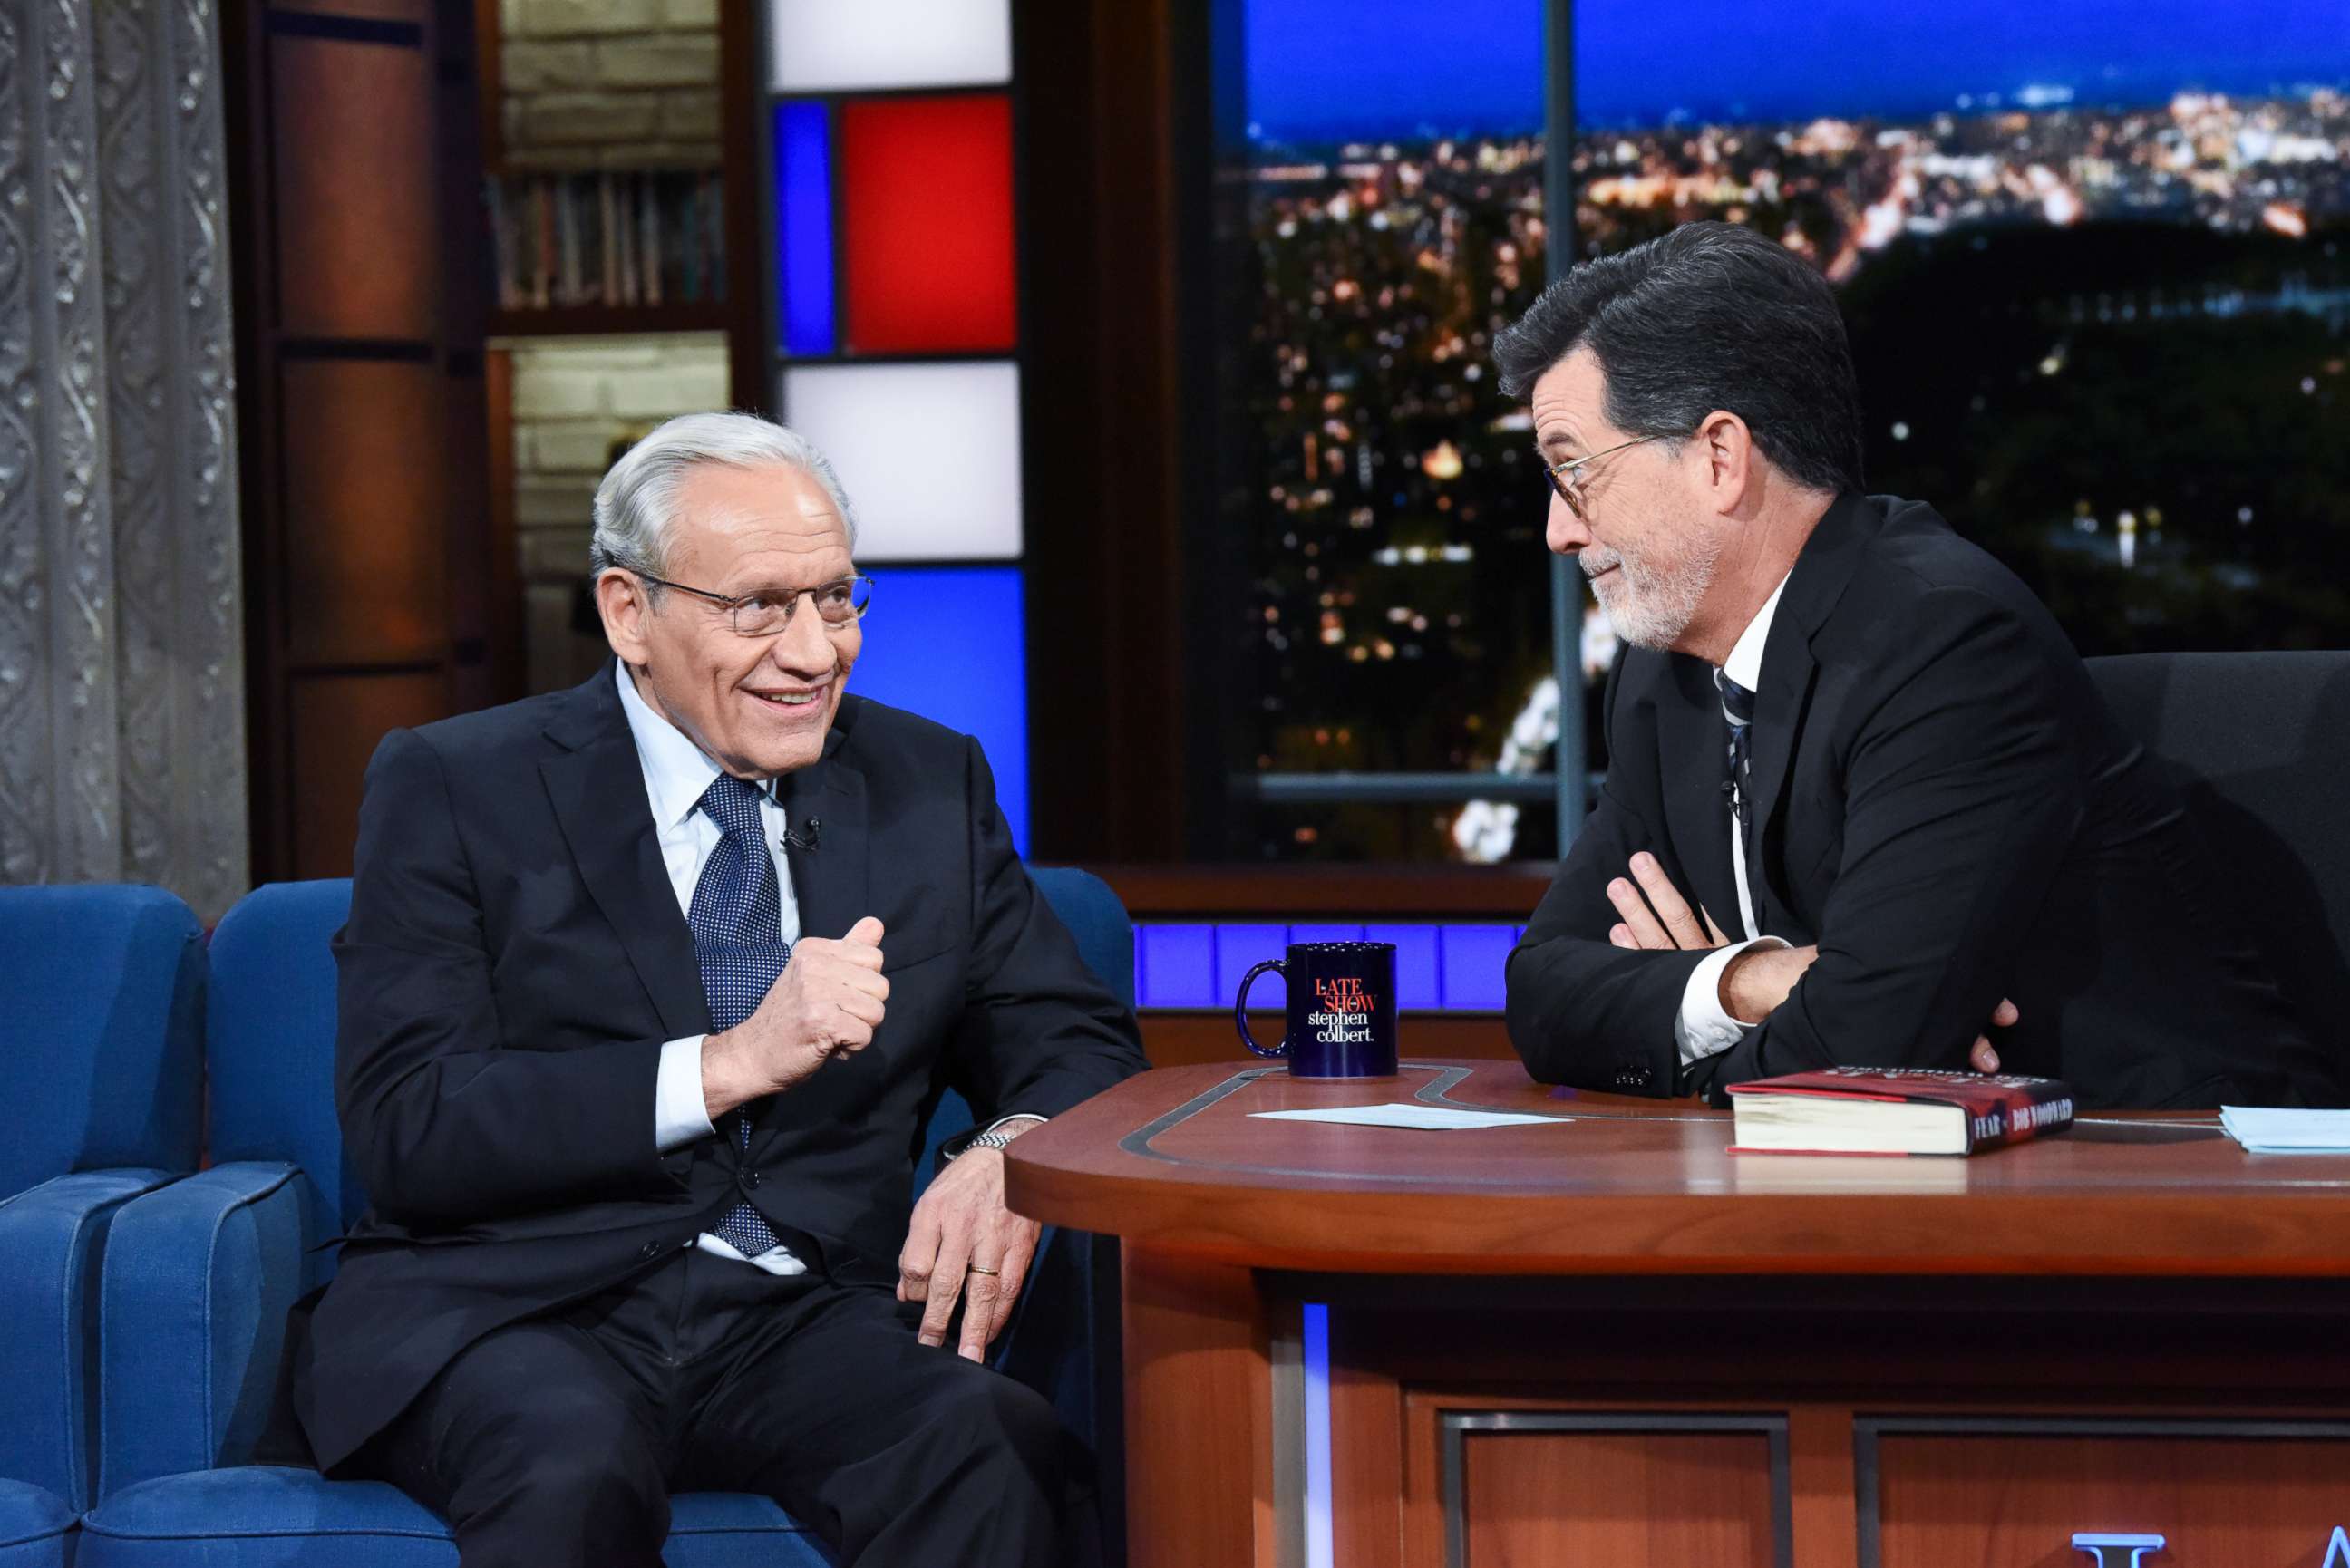 Journalist and author Bob Woodward stopped by "The Late Show" on Monday to discuss his new book, "Fear: Trump in the White House."